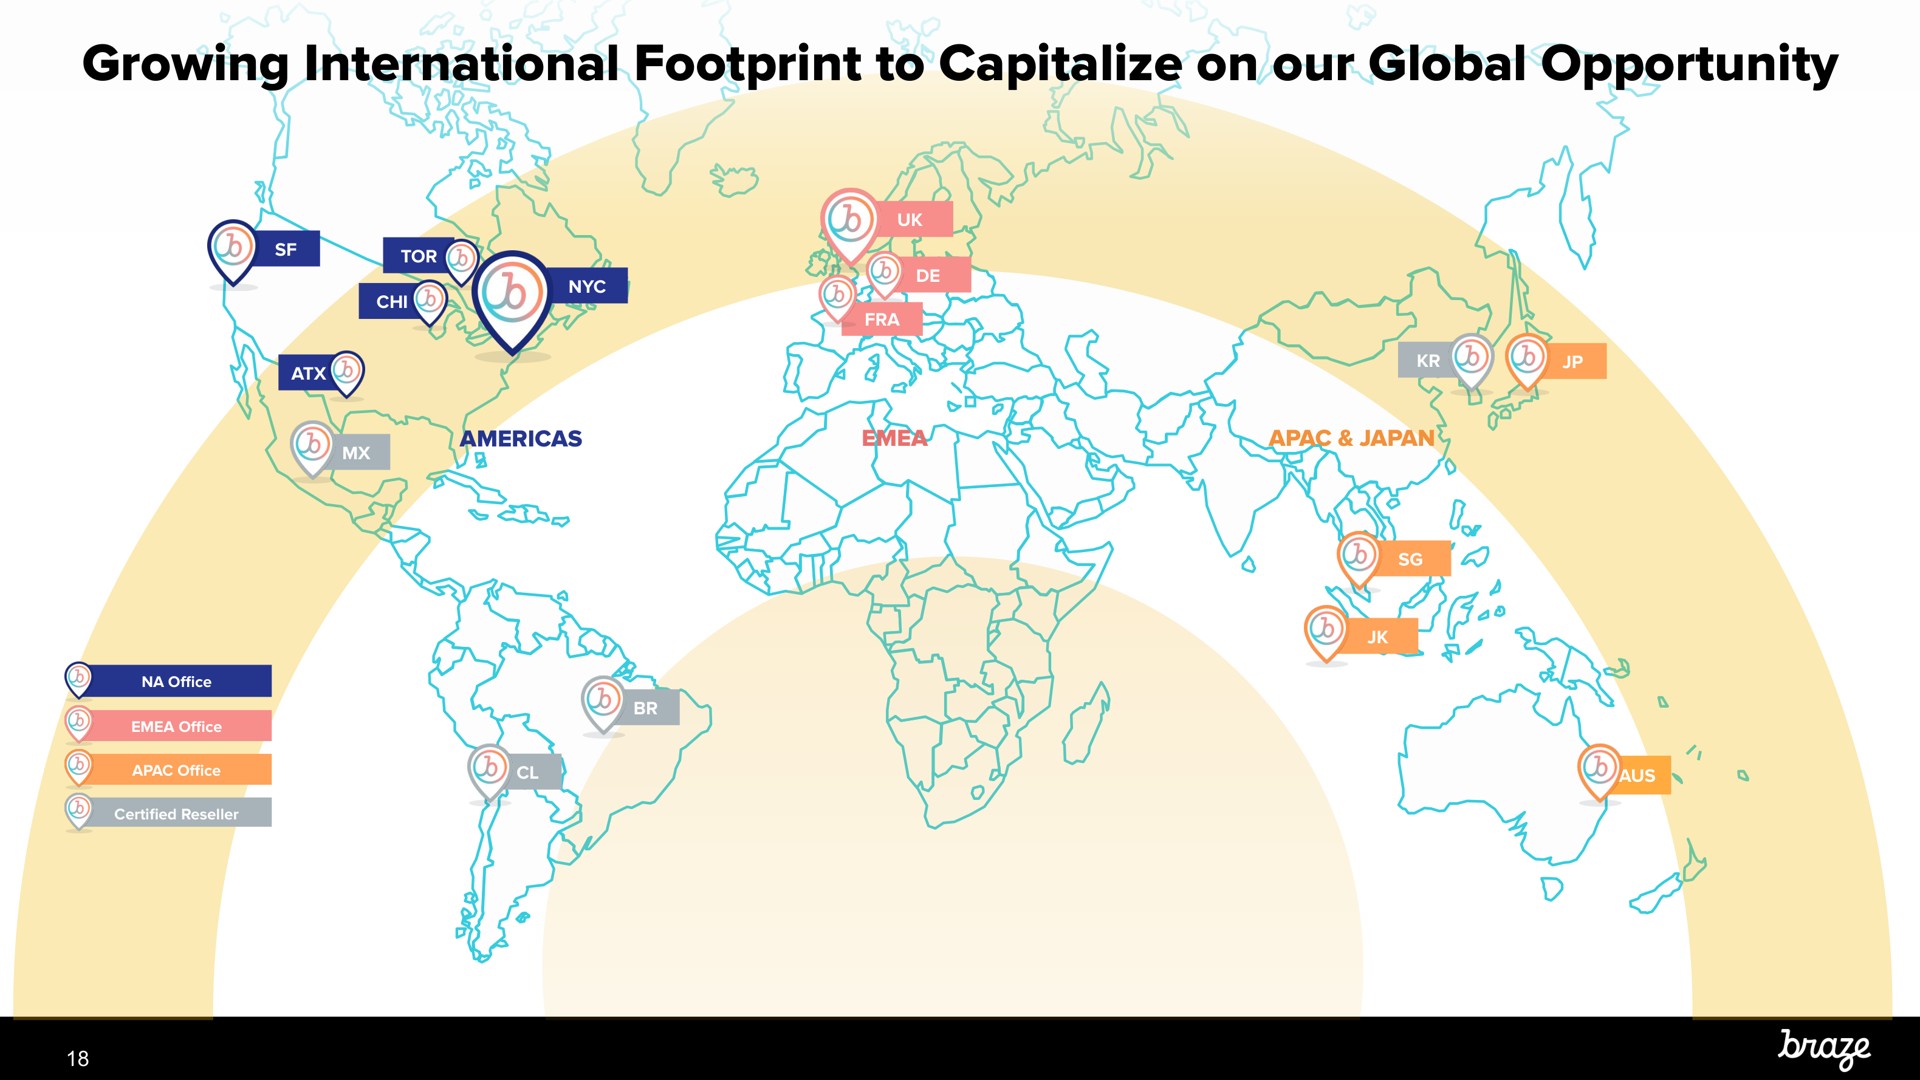 growing international footprint to capitalize on our global opportunity | Braze